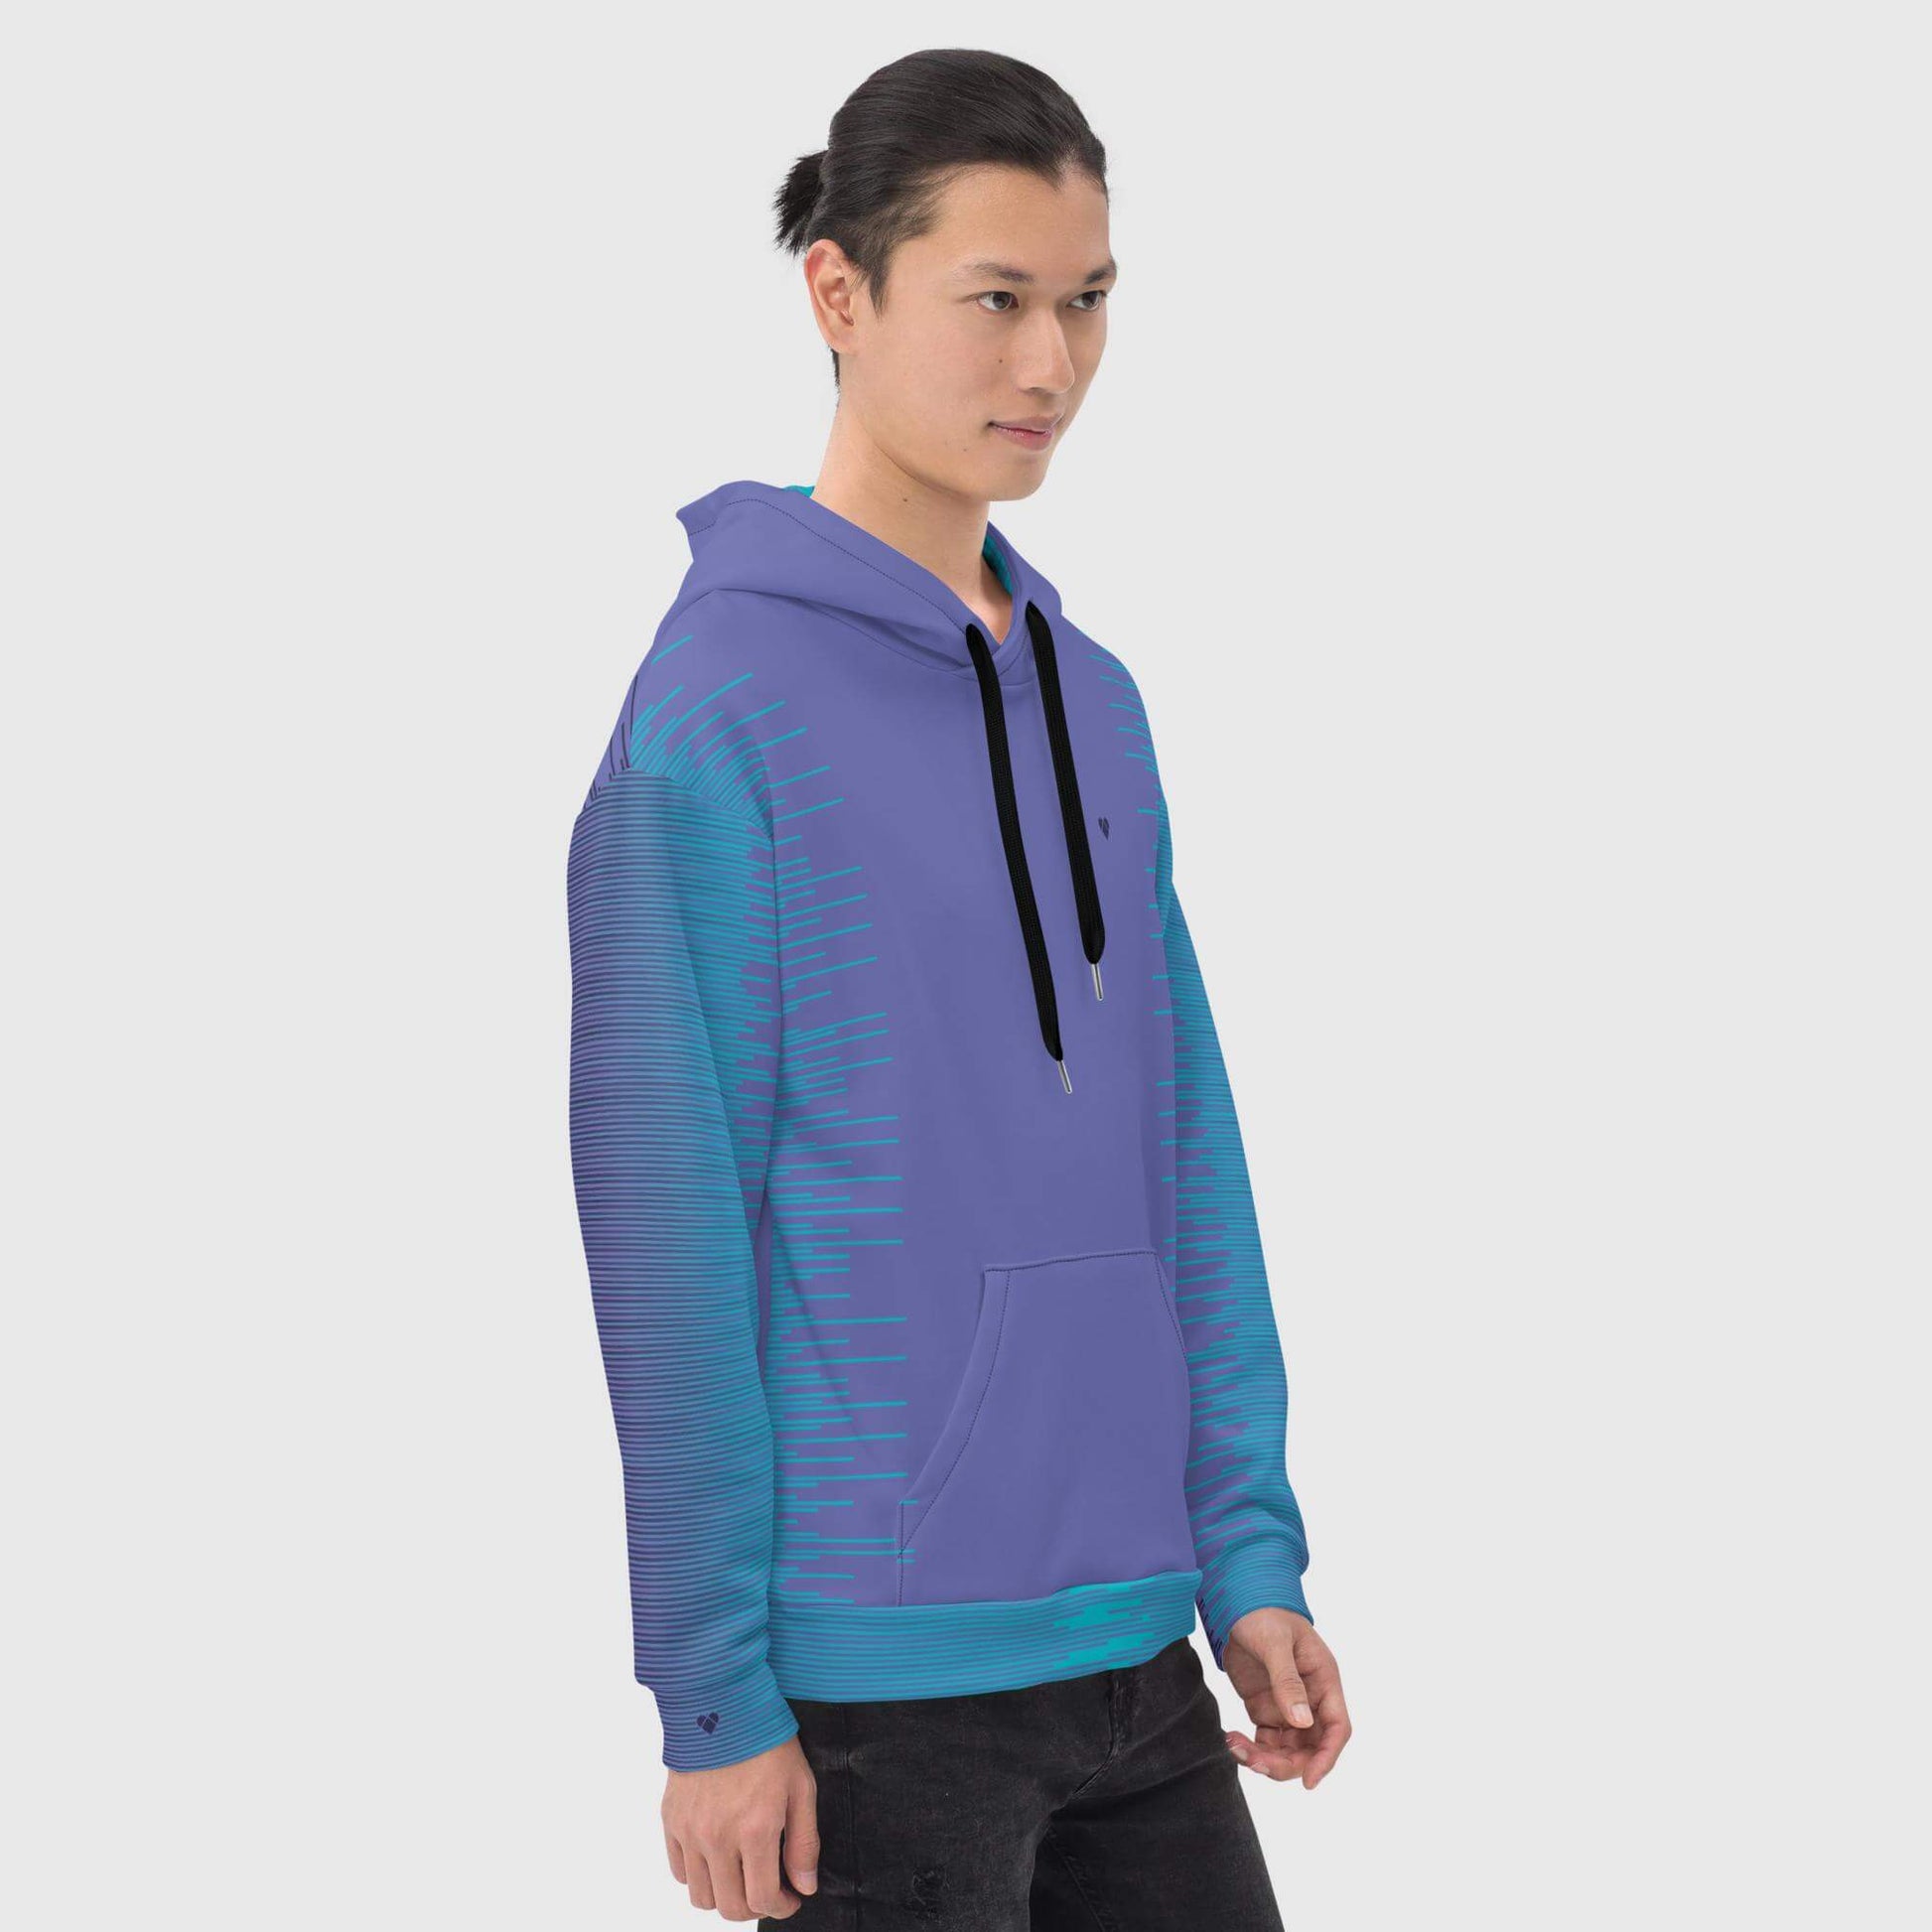 Turquoise gradient hoodie - Mix and match attire